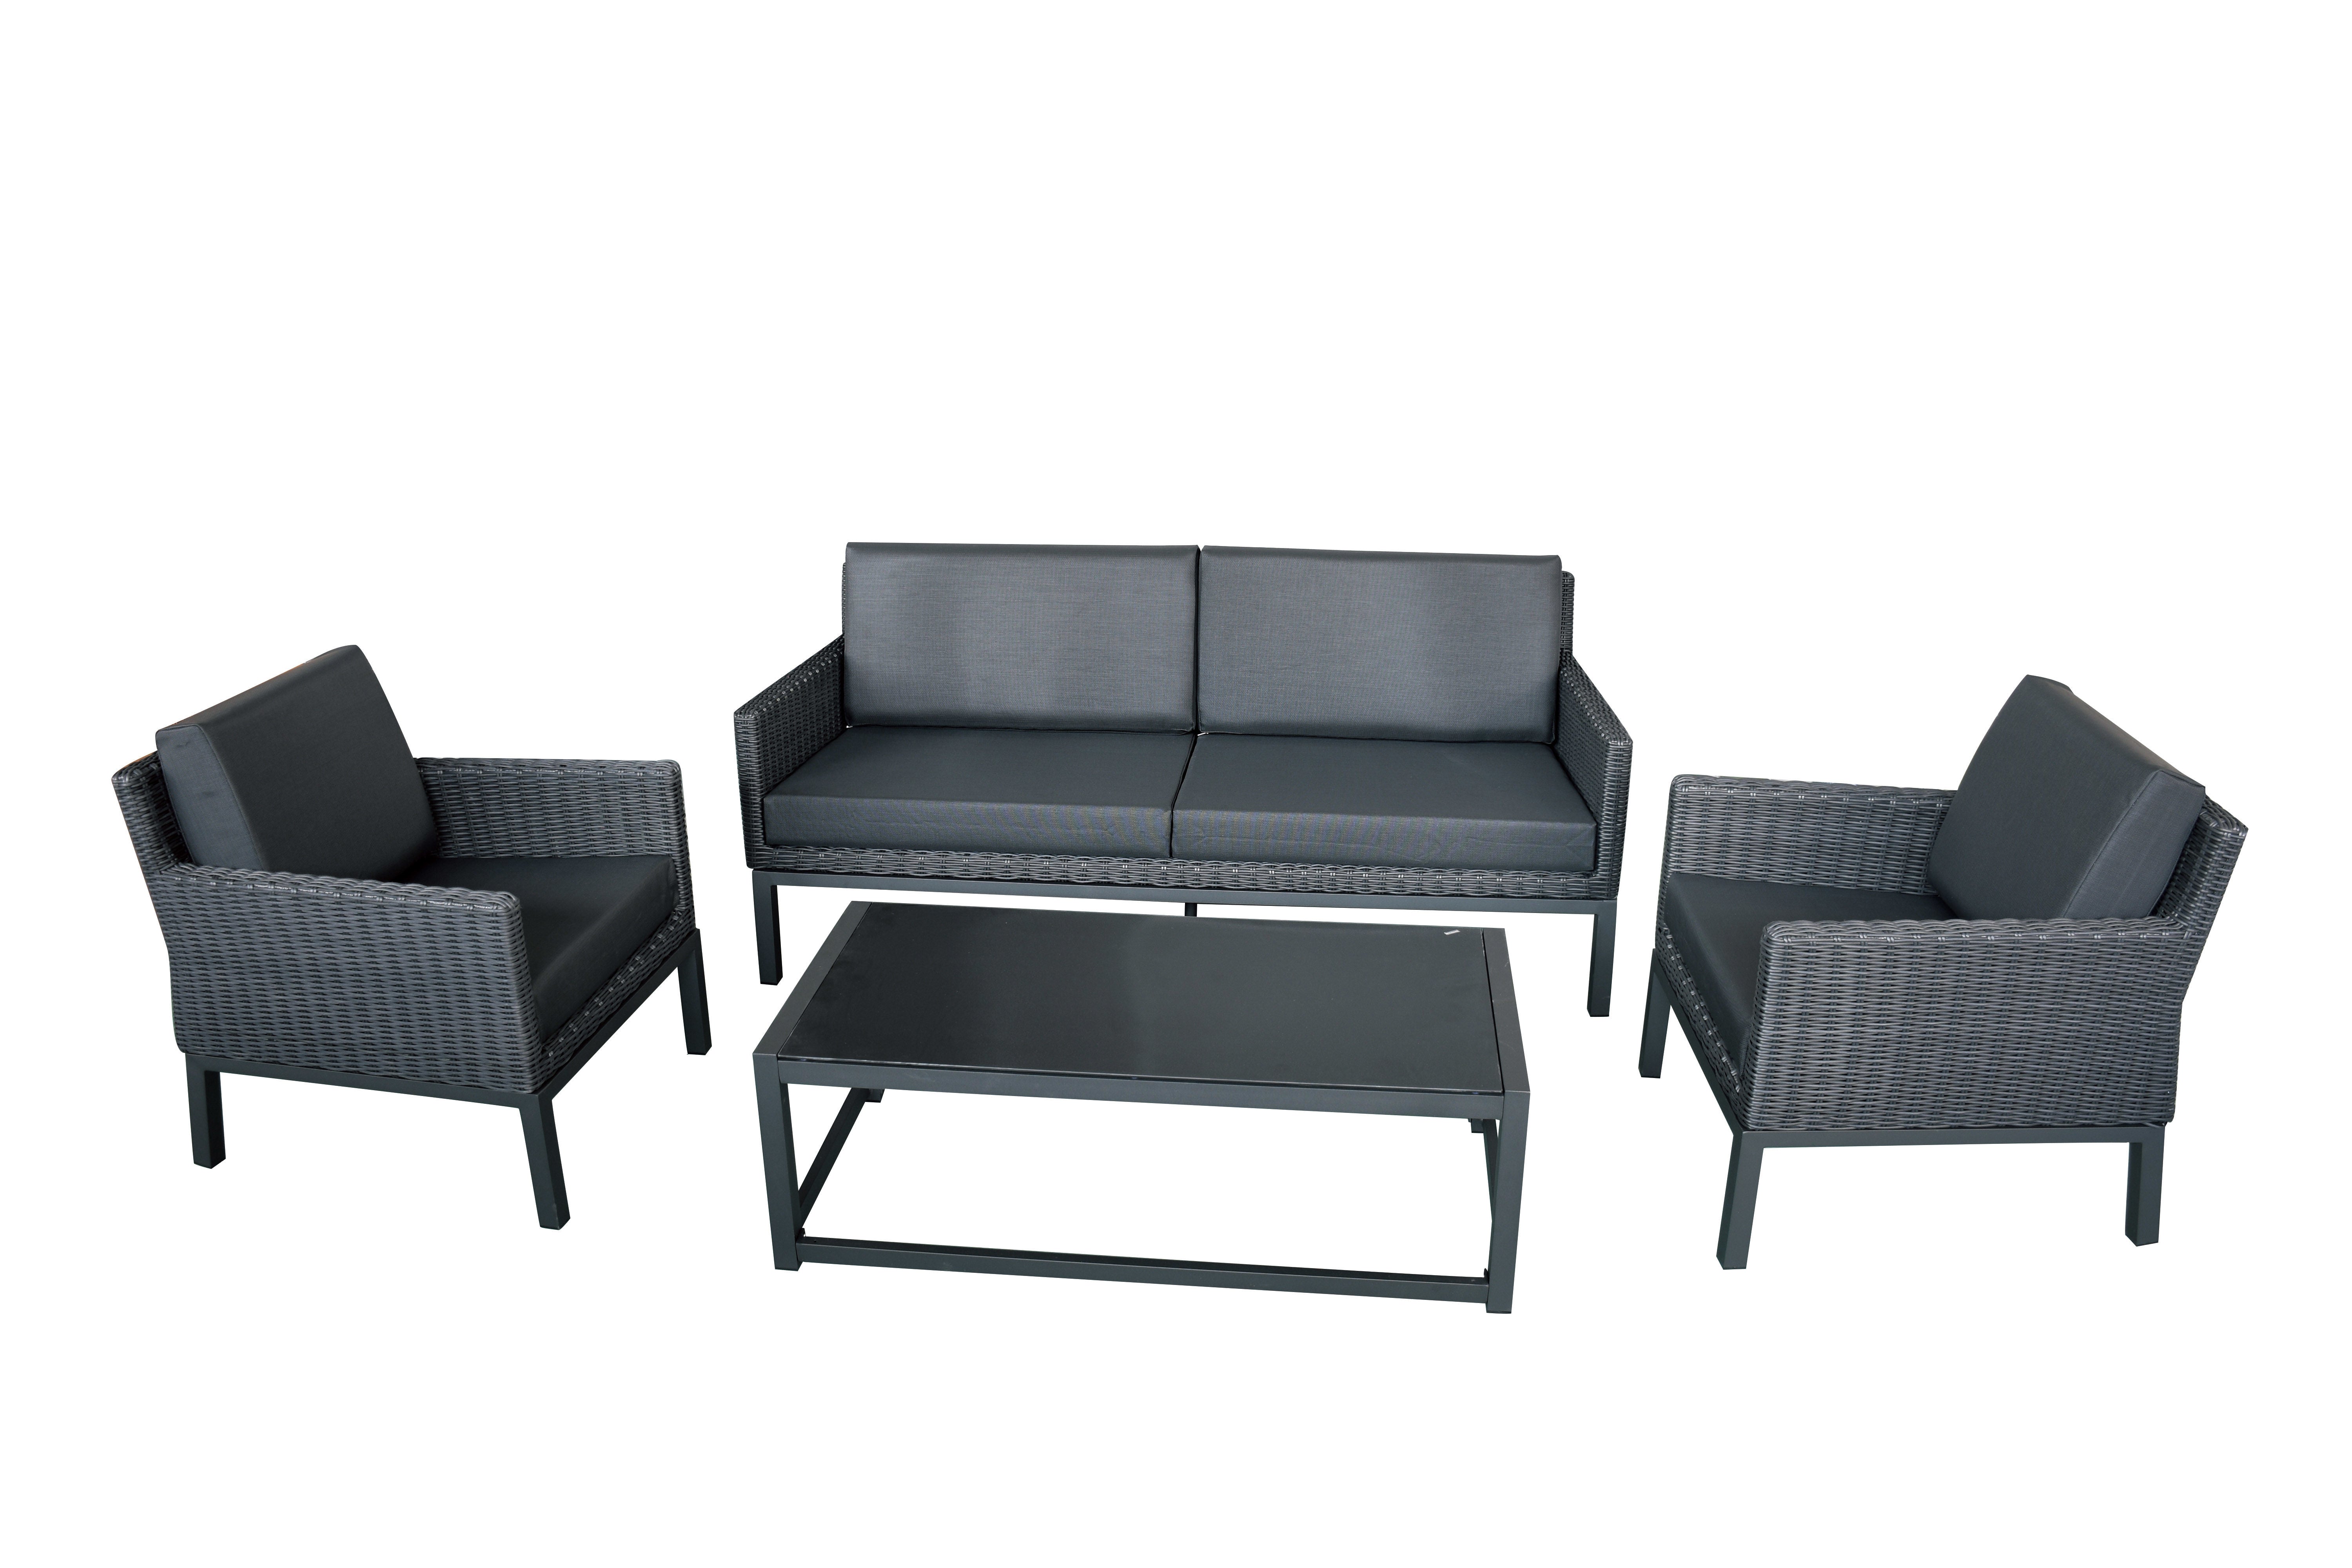 MOSS MOSS-DR0827NN - Key West Collection, 4 pcs Deep seating sofa set in black half-round wicker with 4" black textilene quick dry seat cushions and with black aluminum structure and black glass table top